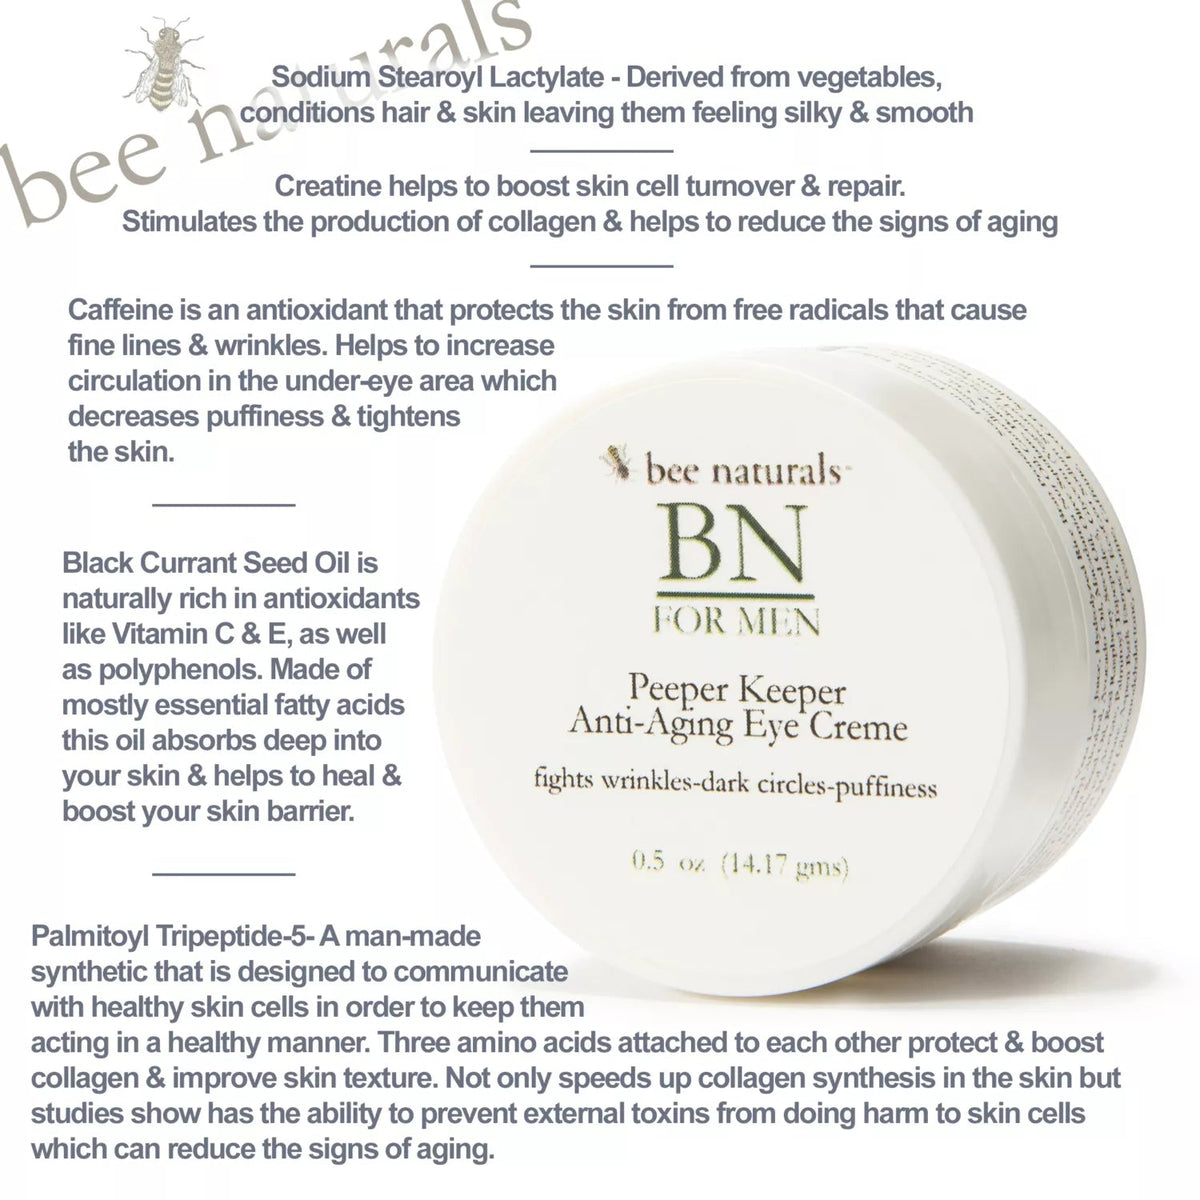 BN For Men Peeper Keeper Anti-Aging Eye Creme - Bee Naturals Store